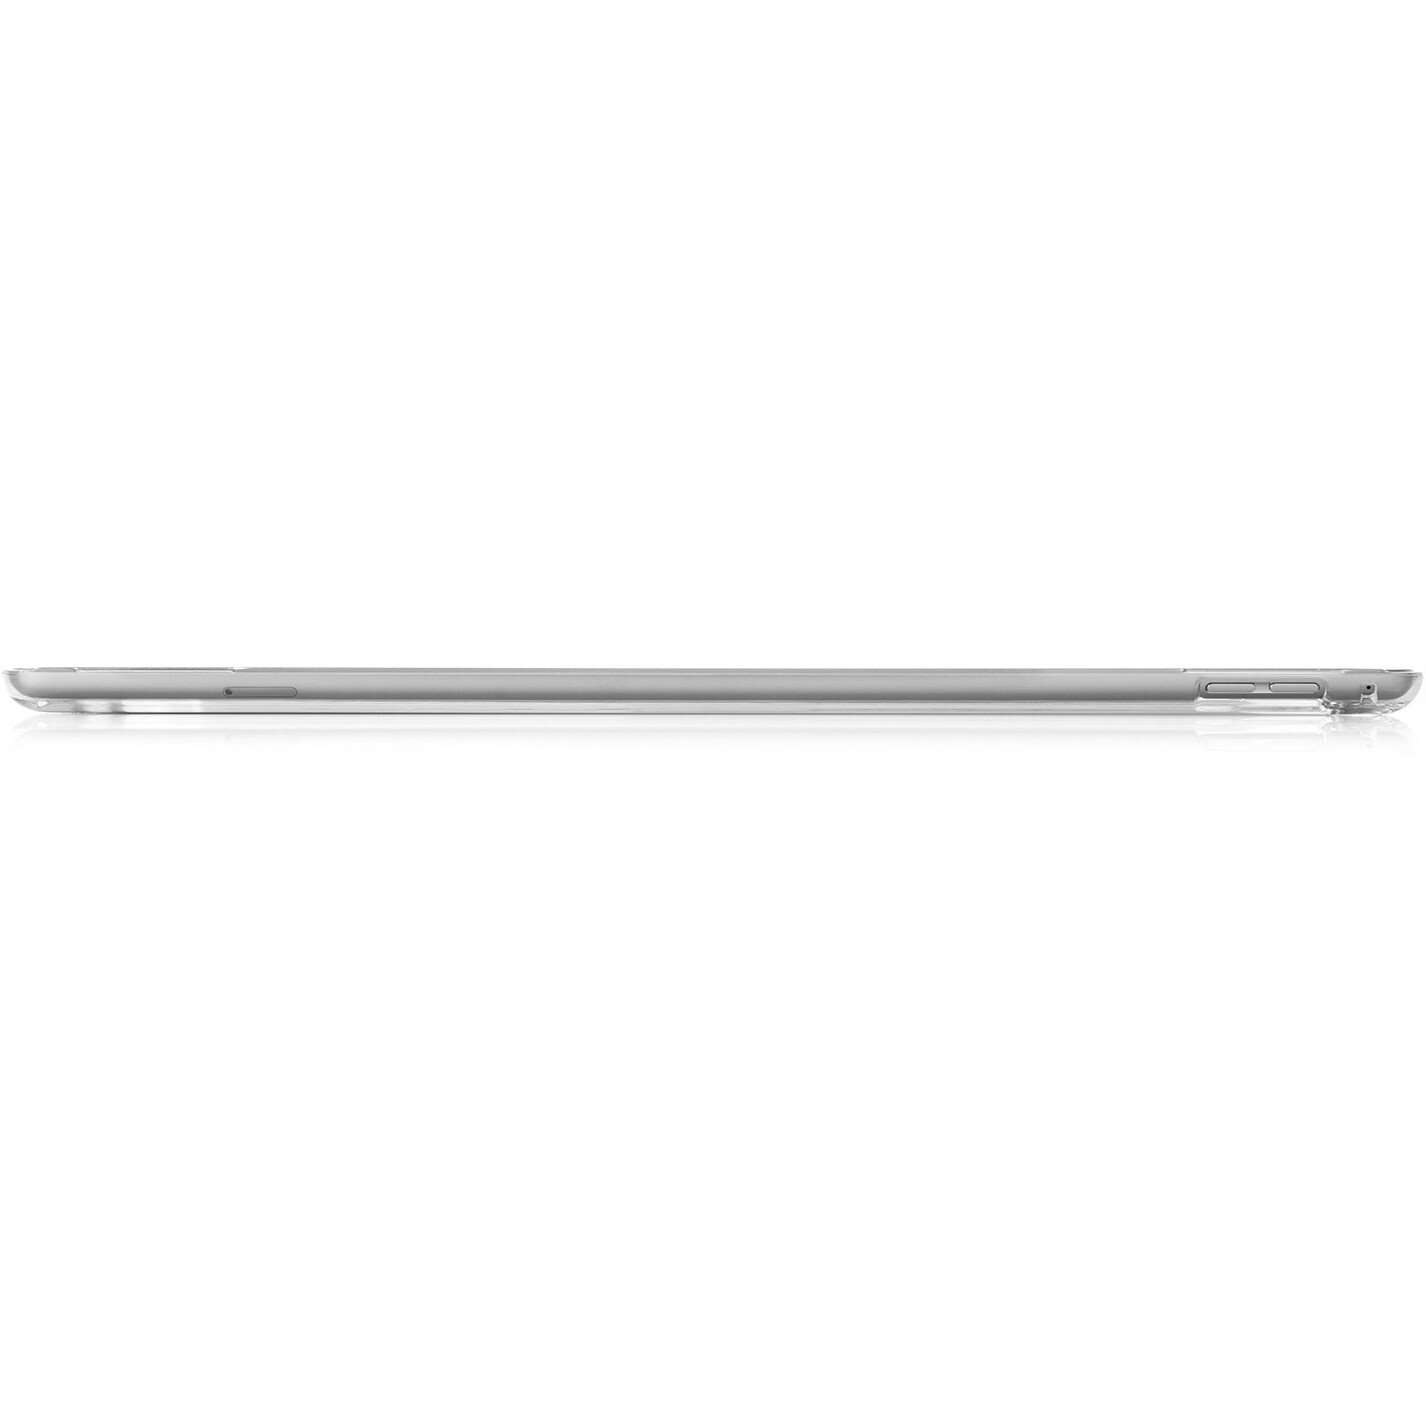 STM Goods half shell Case for Apple iPad Pro Tablet - Clear